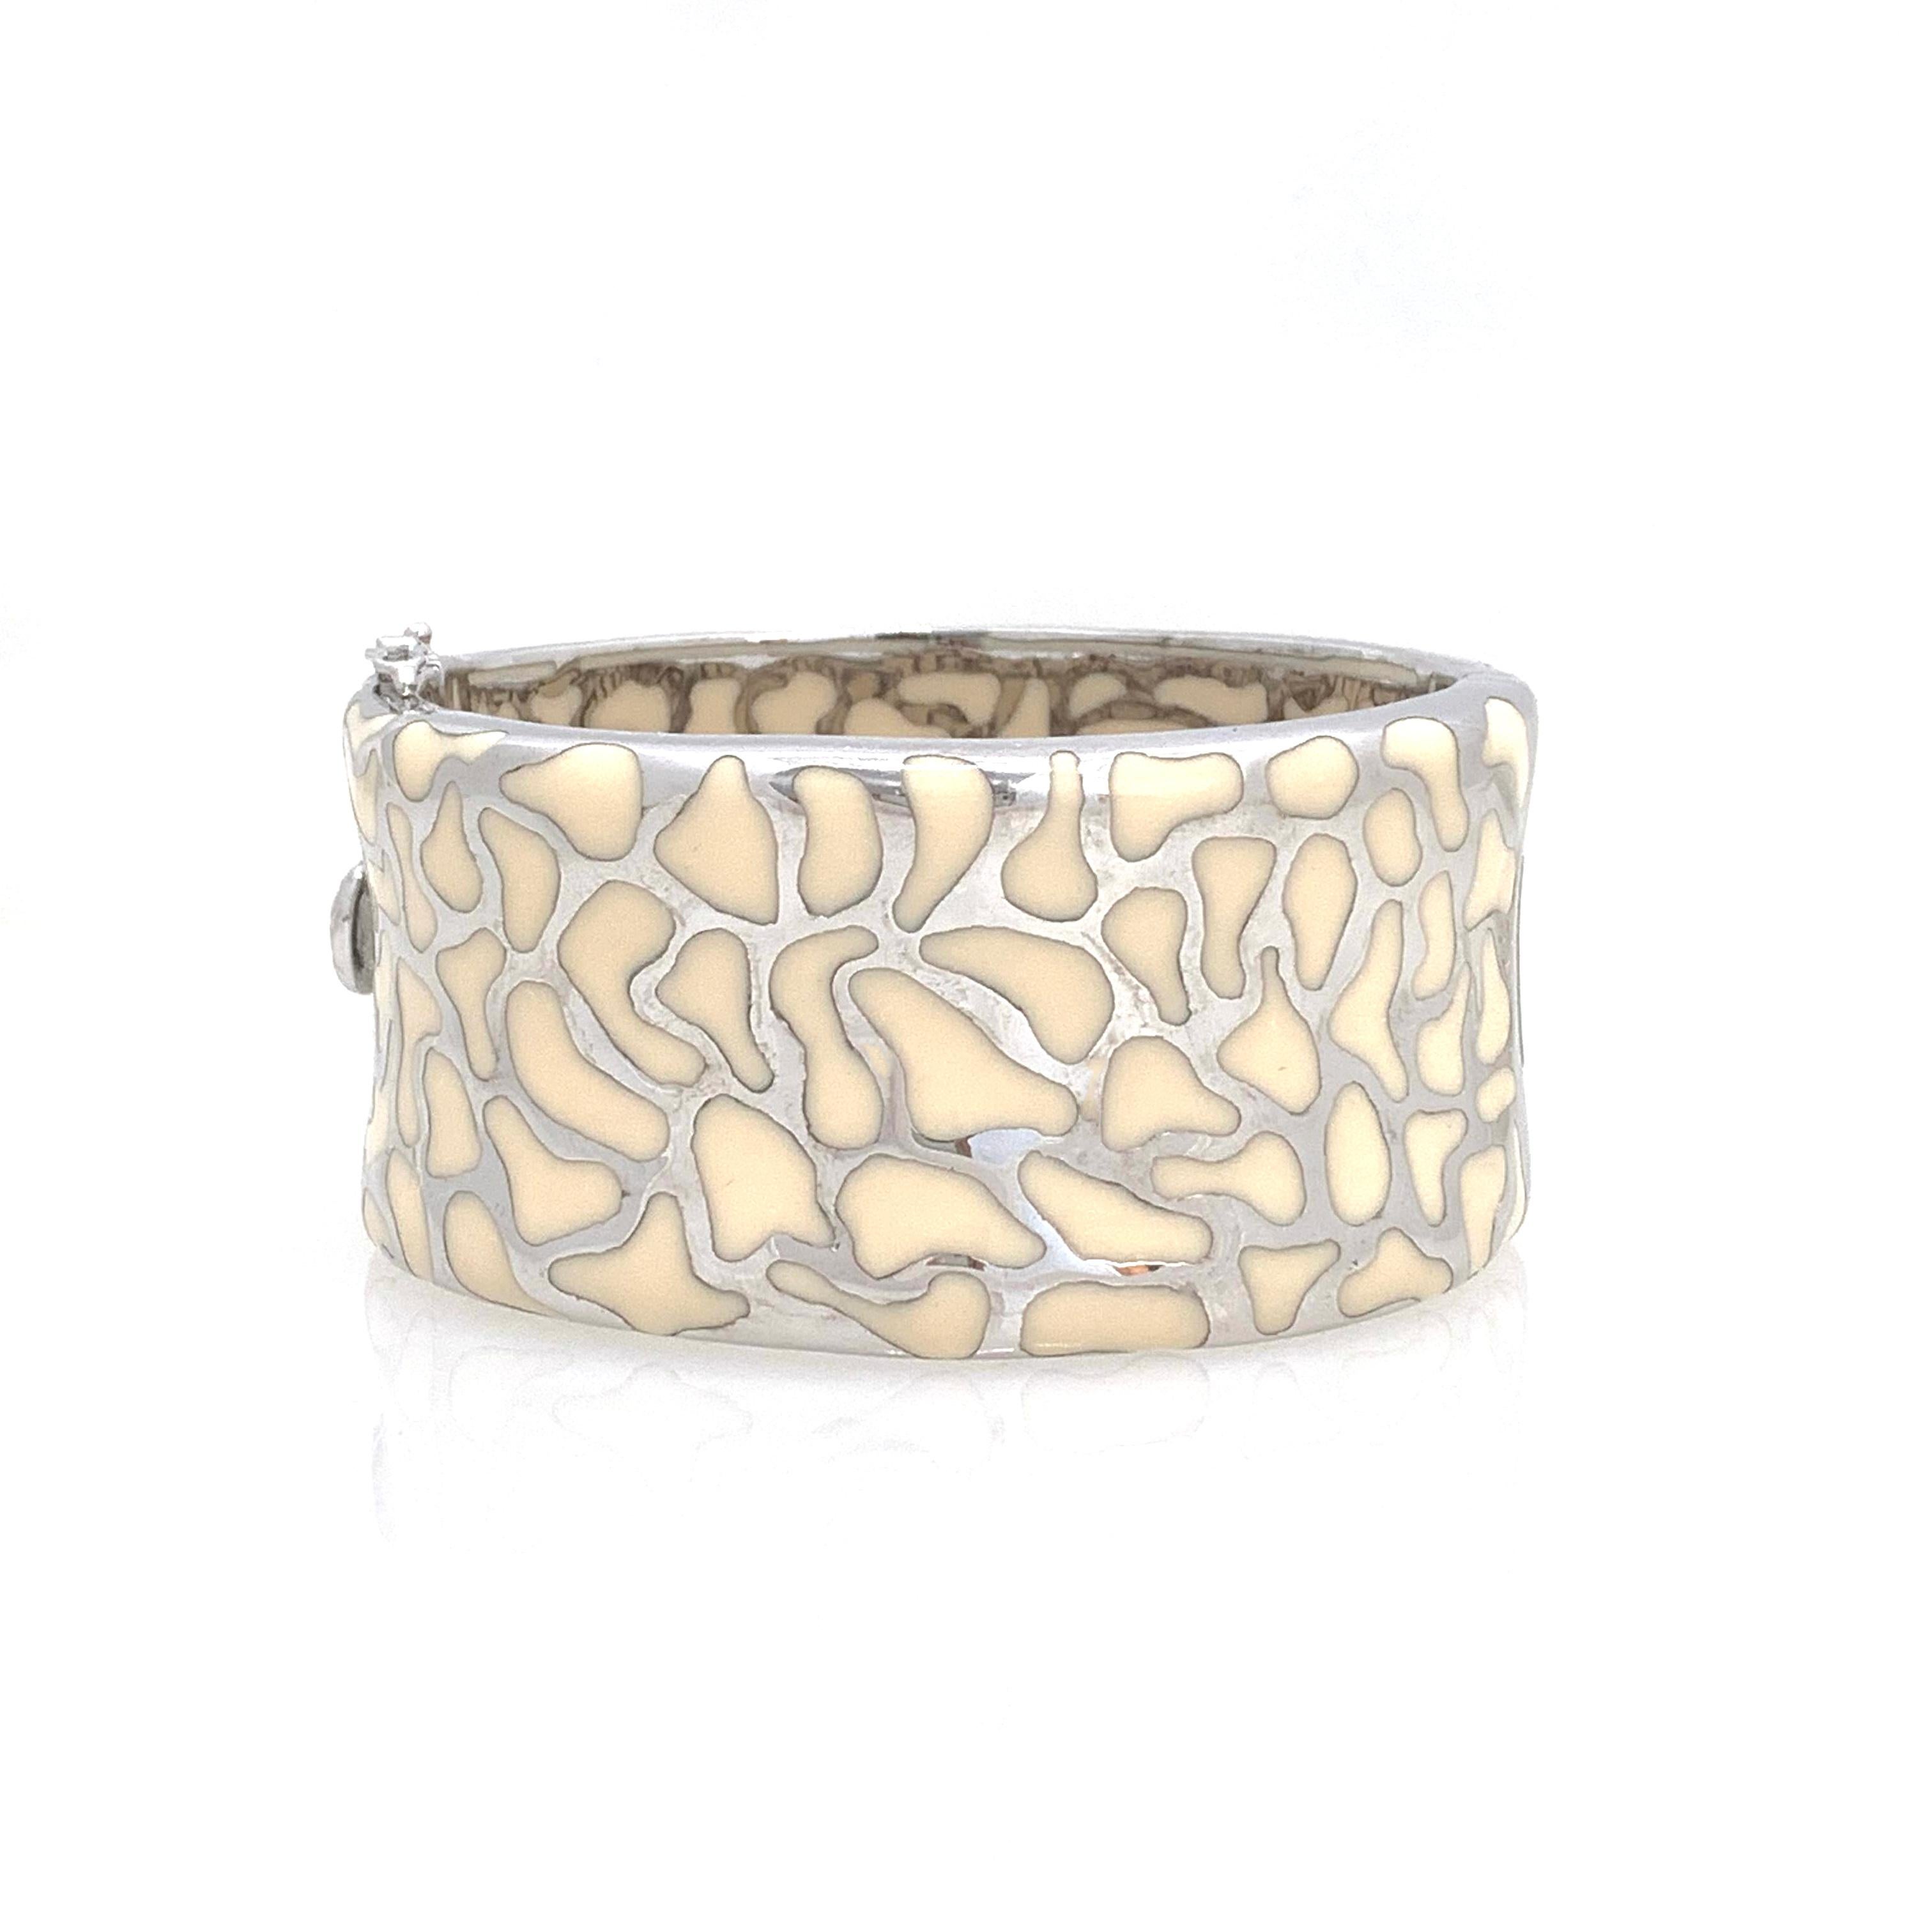 Fabulous safari print enamel sterling silver wide cuff bracelet. This beautiful handmade enamel in safari pattern. The base metal is platinum rhodium plated sterling silver. Push clasp and ‘8’ safety lock. 

The bracelet measures  1-3/8” width.